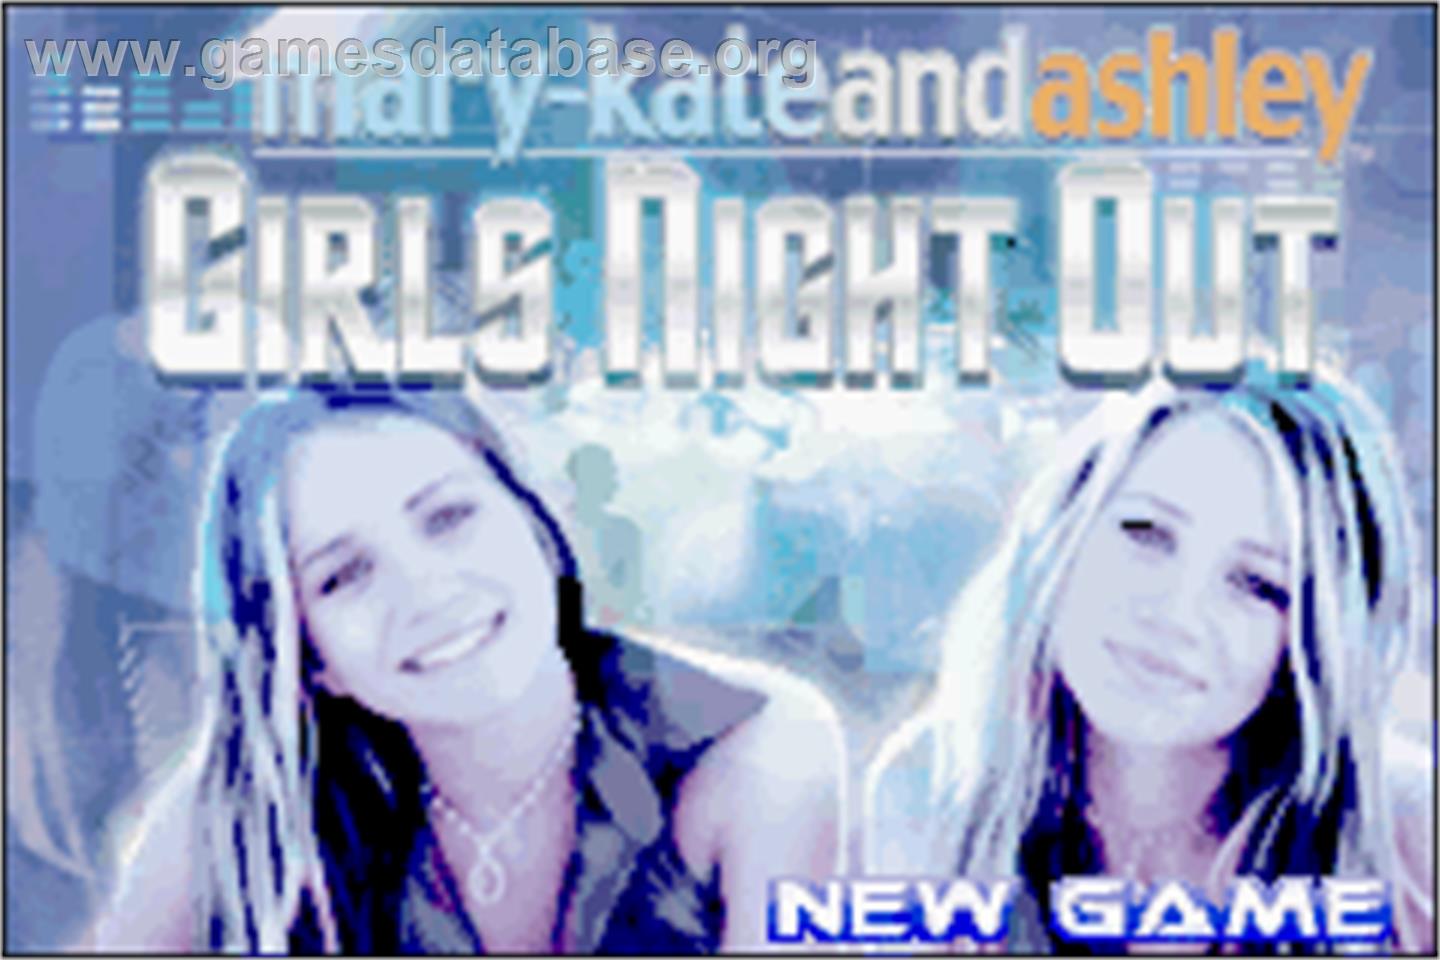 Mary-Kate and Ashley: Girls Night Out - Nintendo Game Boy Advance - Artwork - Title Screen